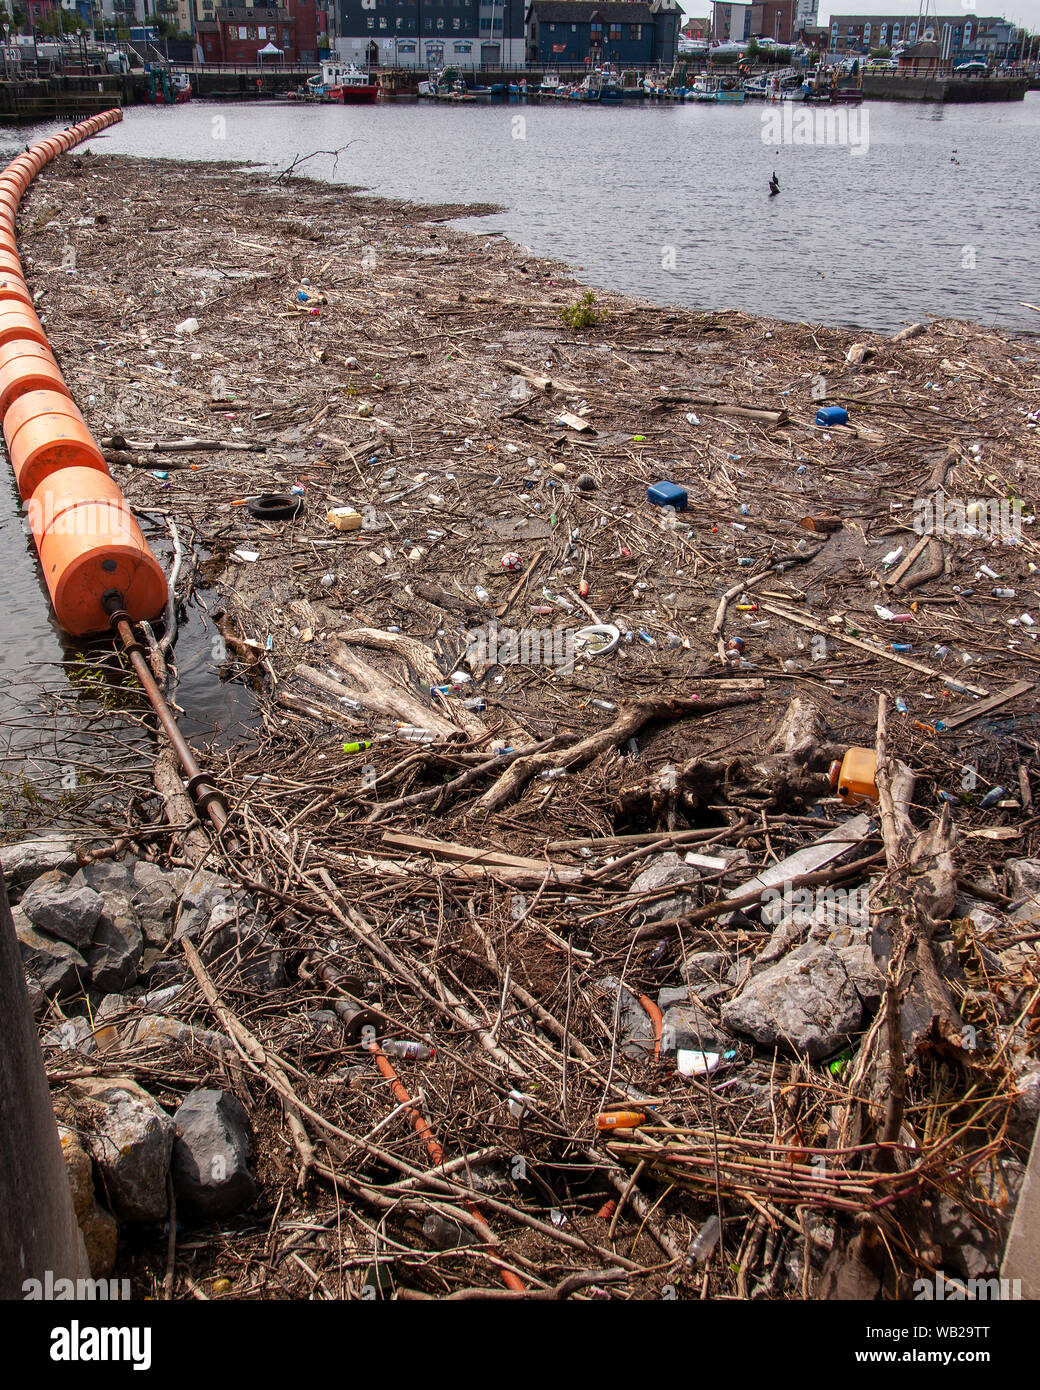 Floating barrier full of rubbish, wood, plastic bottles and flotsam near the the mouth of the River Tawe in Swansea, Wales, UK. Stock Photo